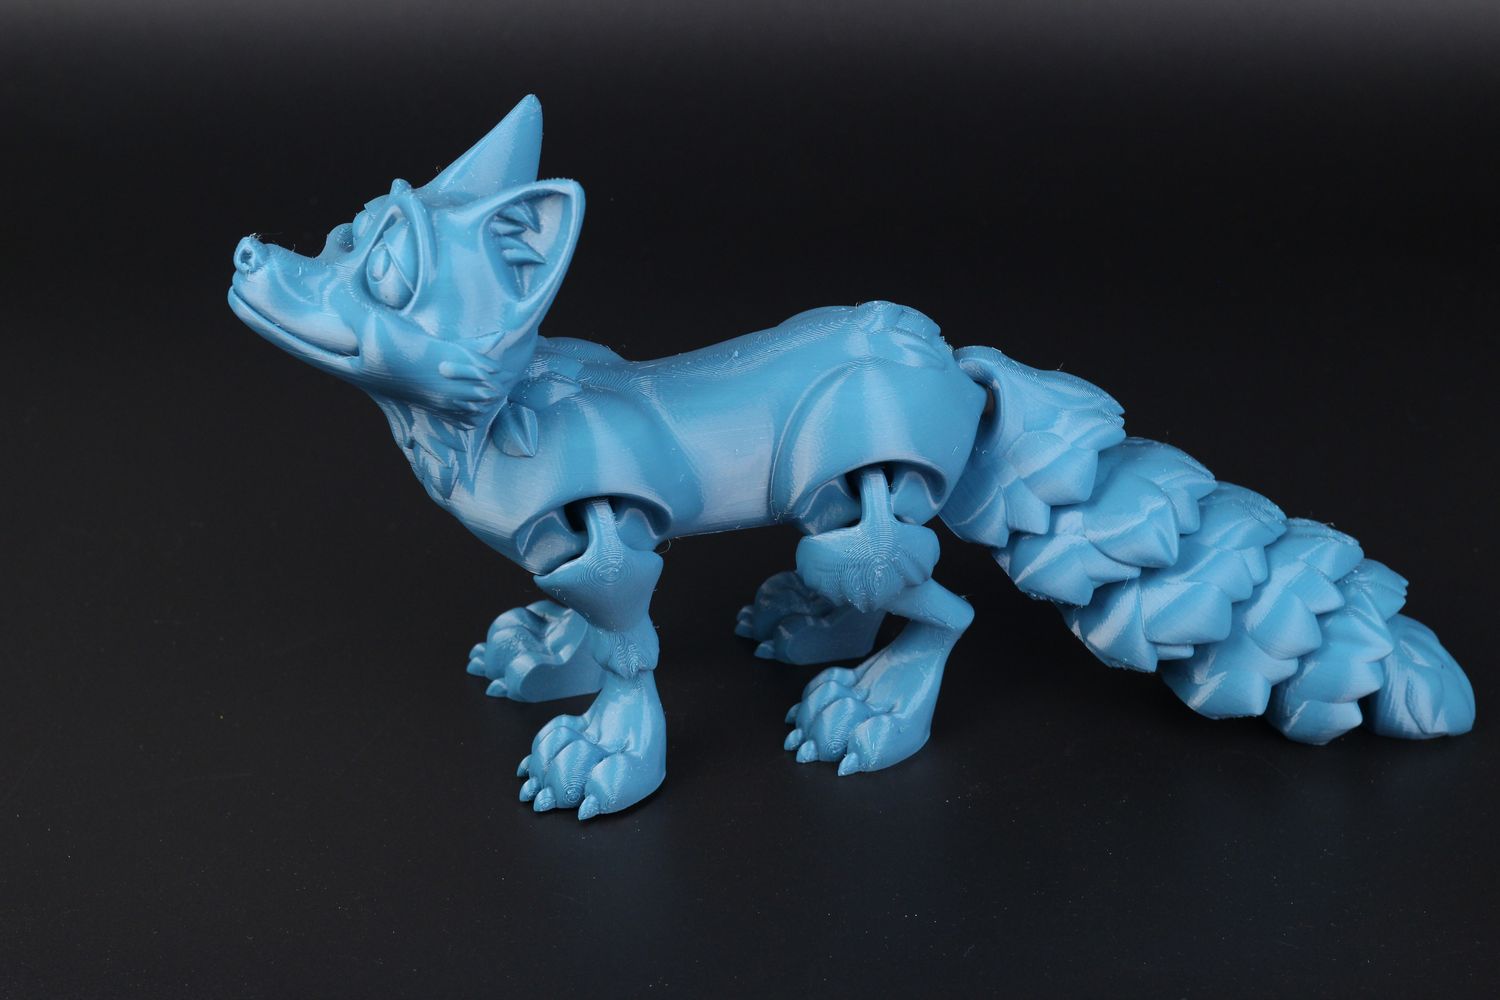 Flexi Fox printed on Creality CR M4 in PETG3 | Creality CR-M4 Review: Large Format 3D Printer